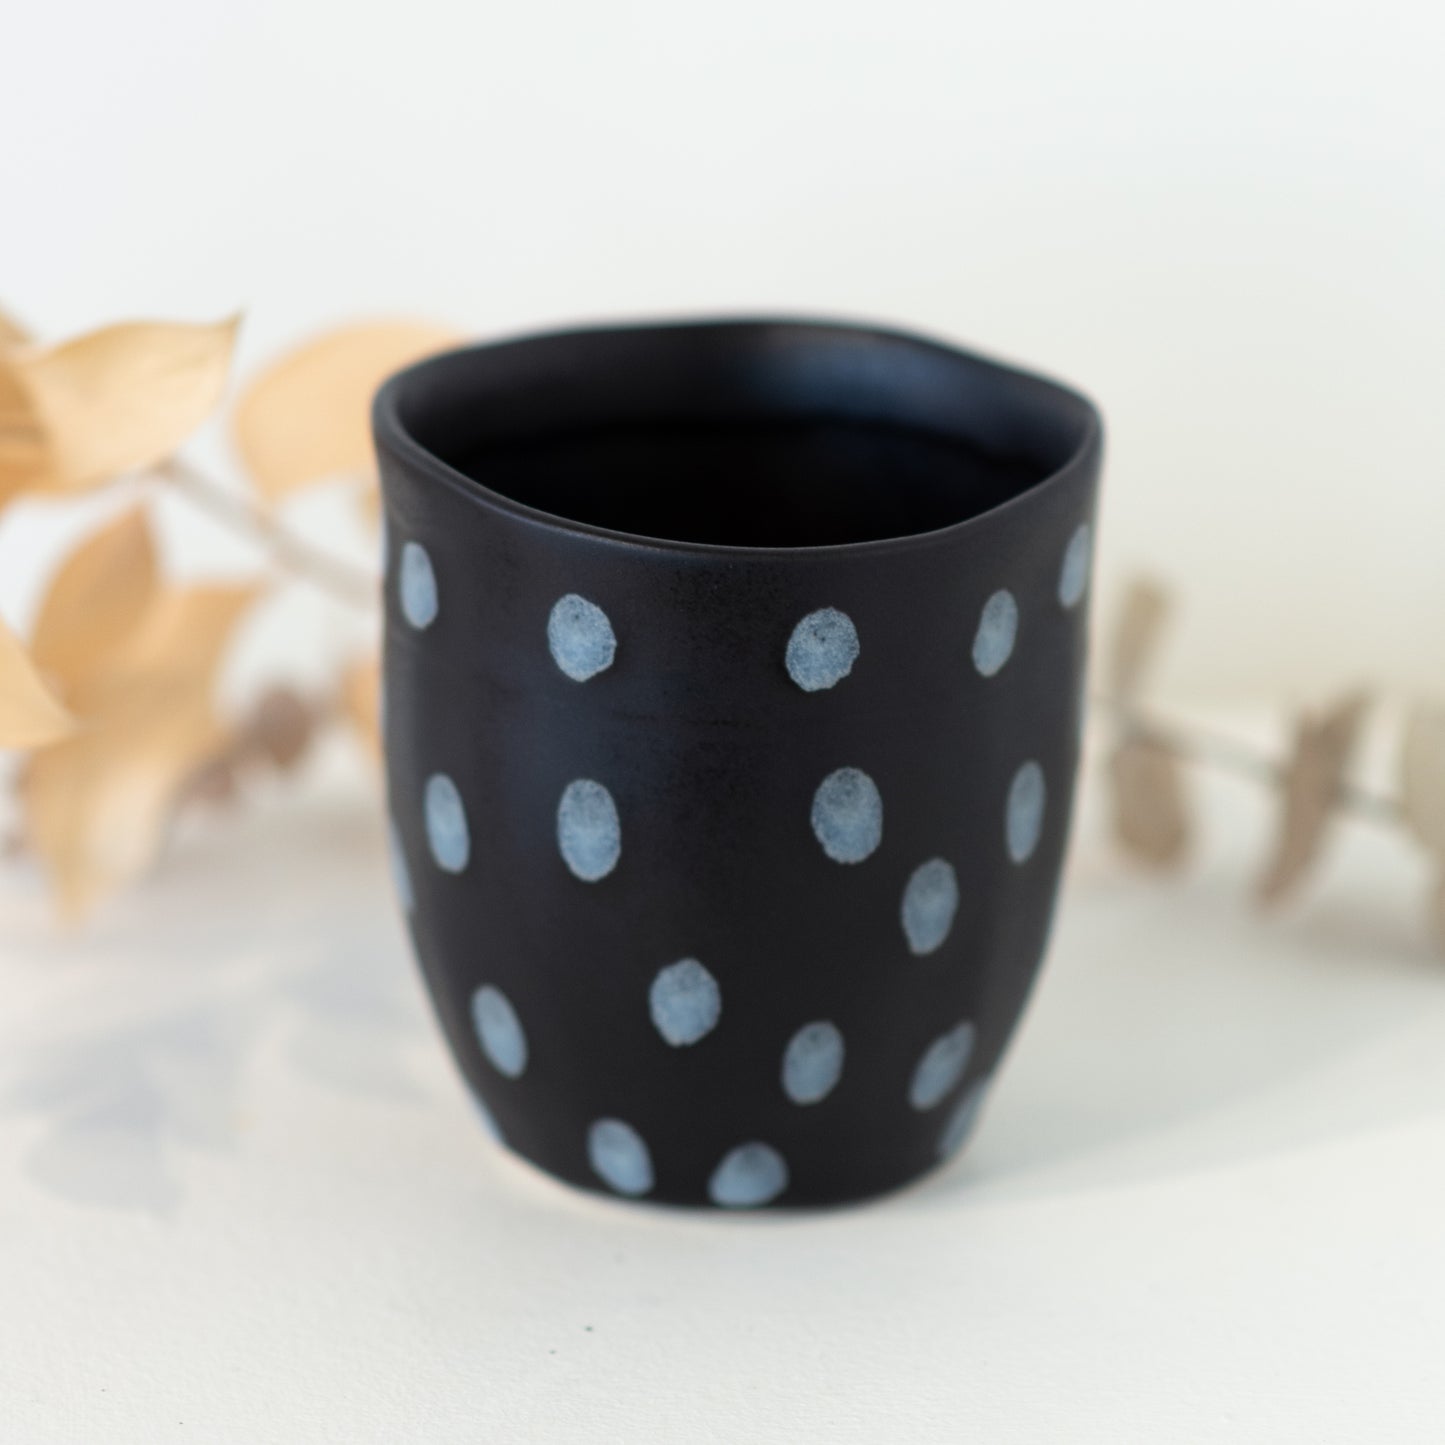 Black cup with grey/white dot patterning.